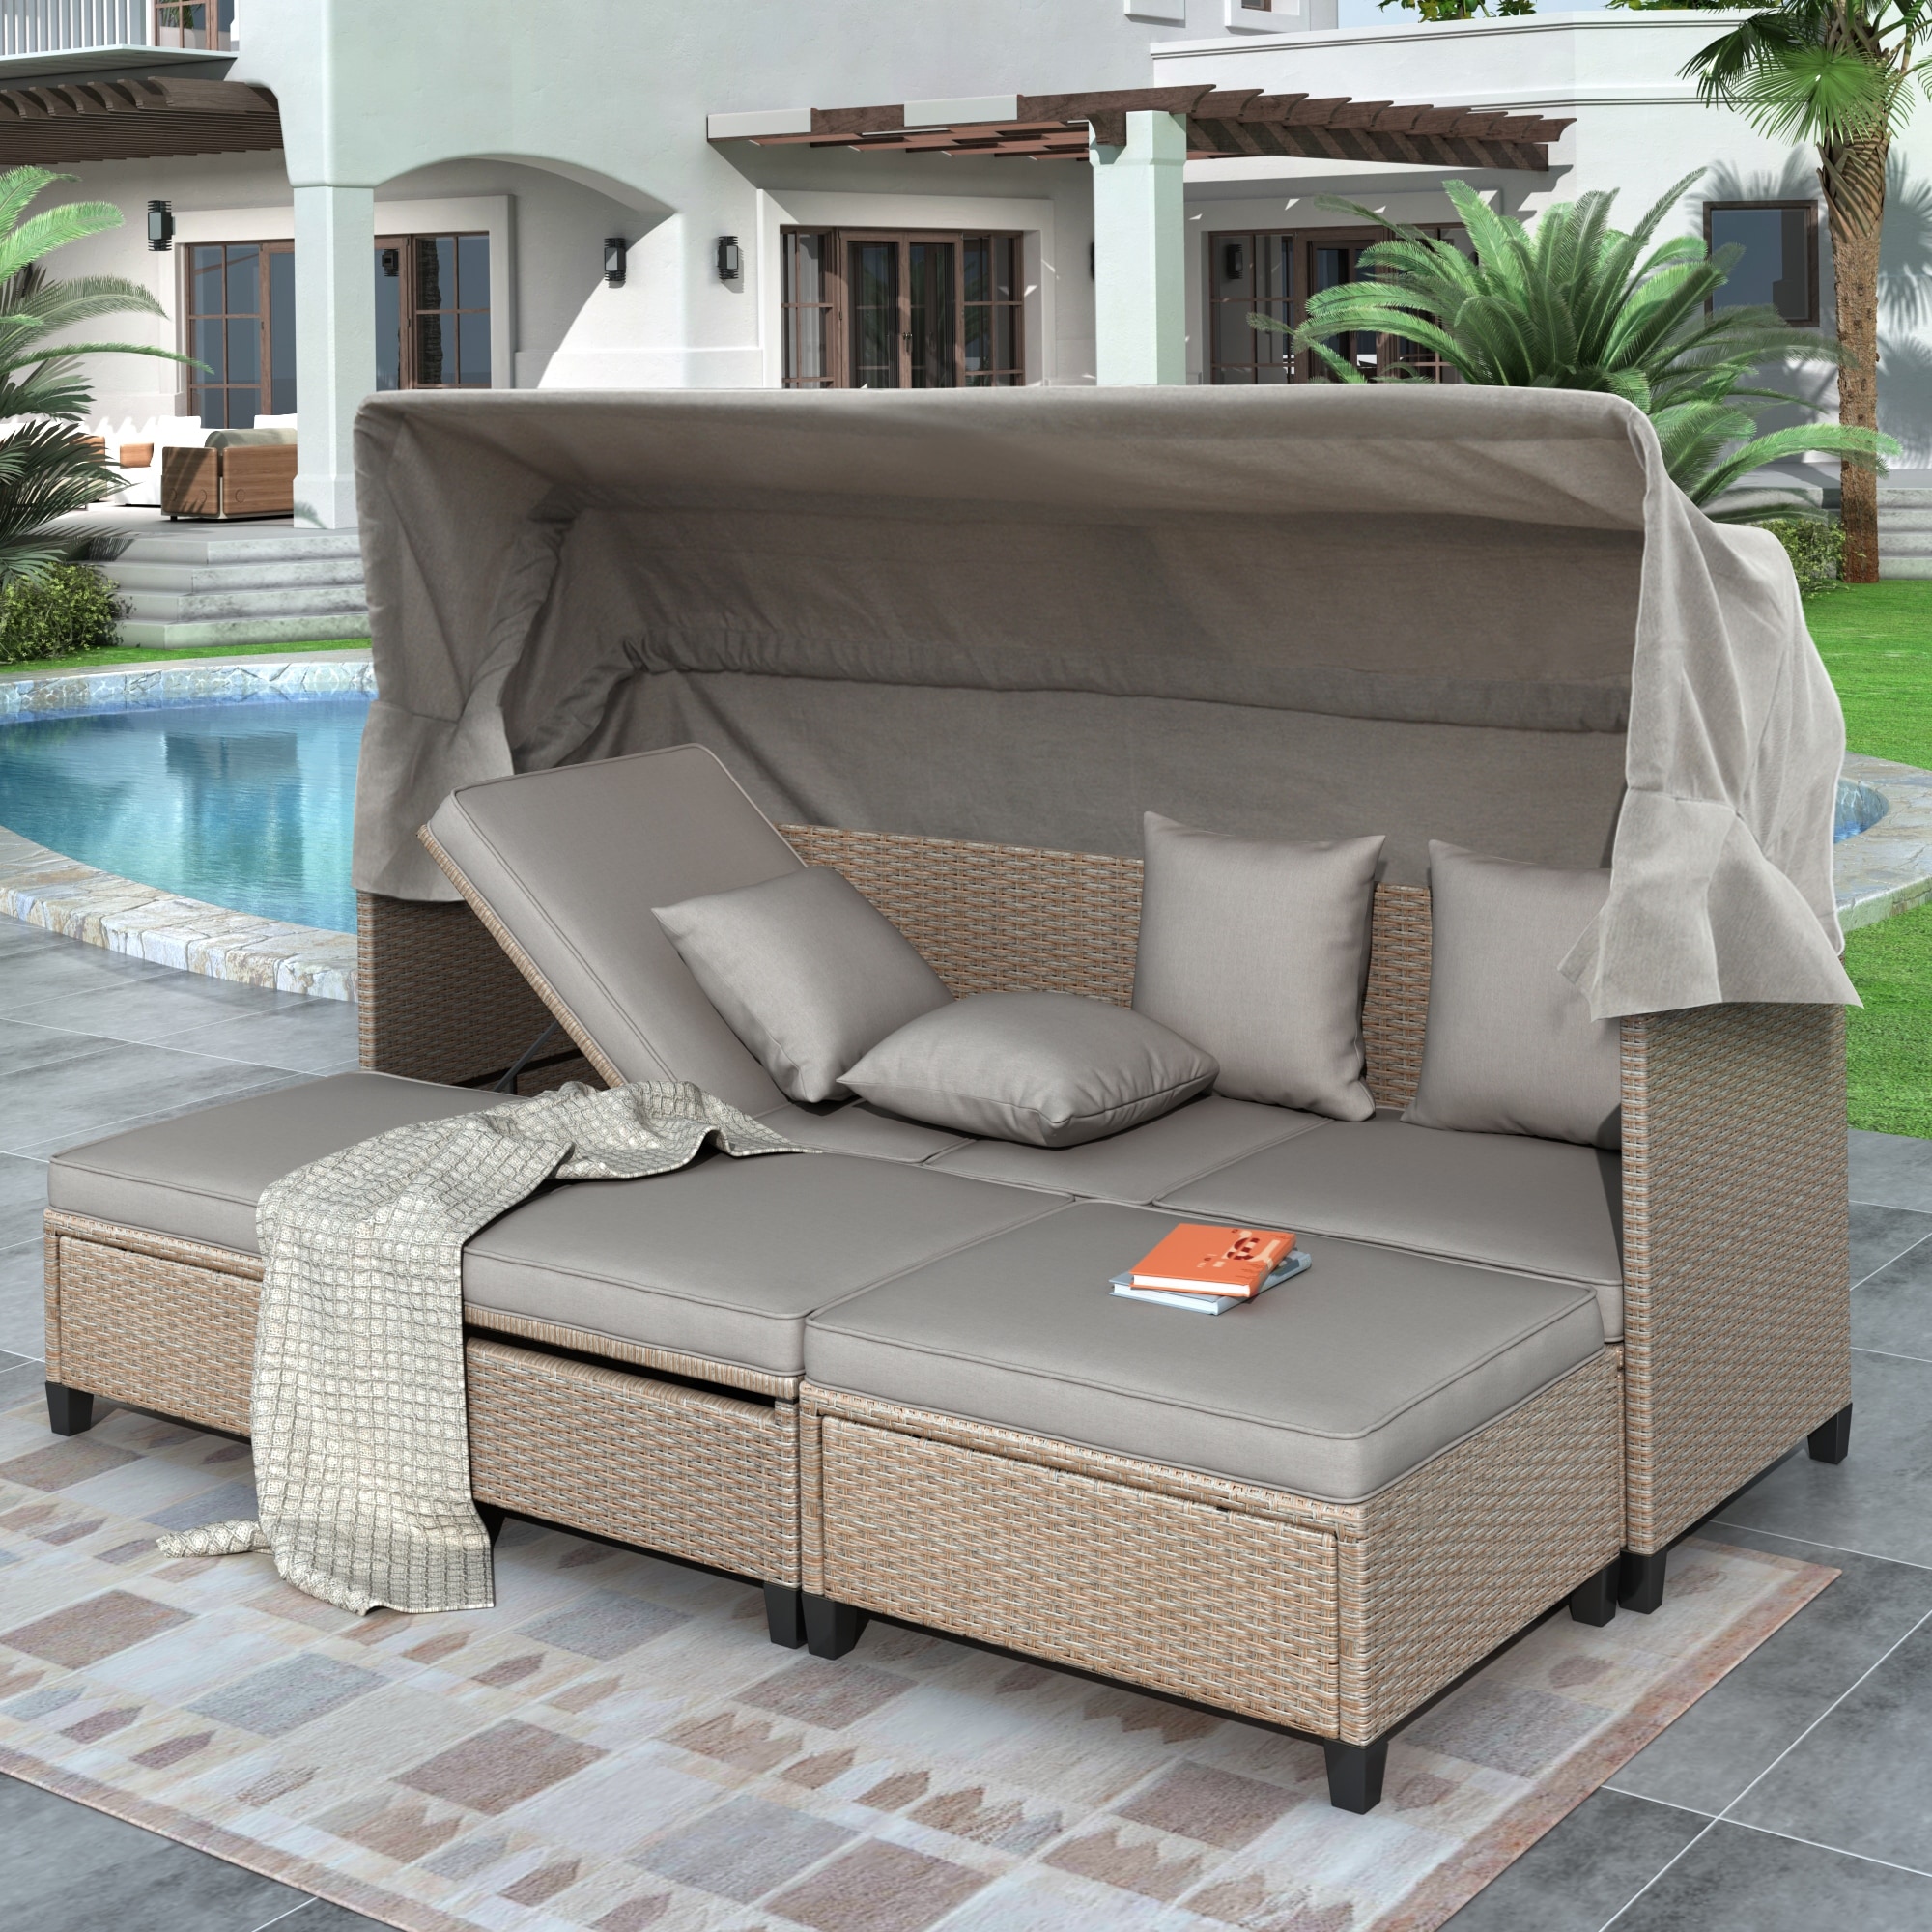 4 Piece Wicker Patio Sofa Set  Uv-resistant Daybed Sunbed With Retractable Canopy& Lifting Table